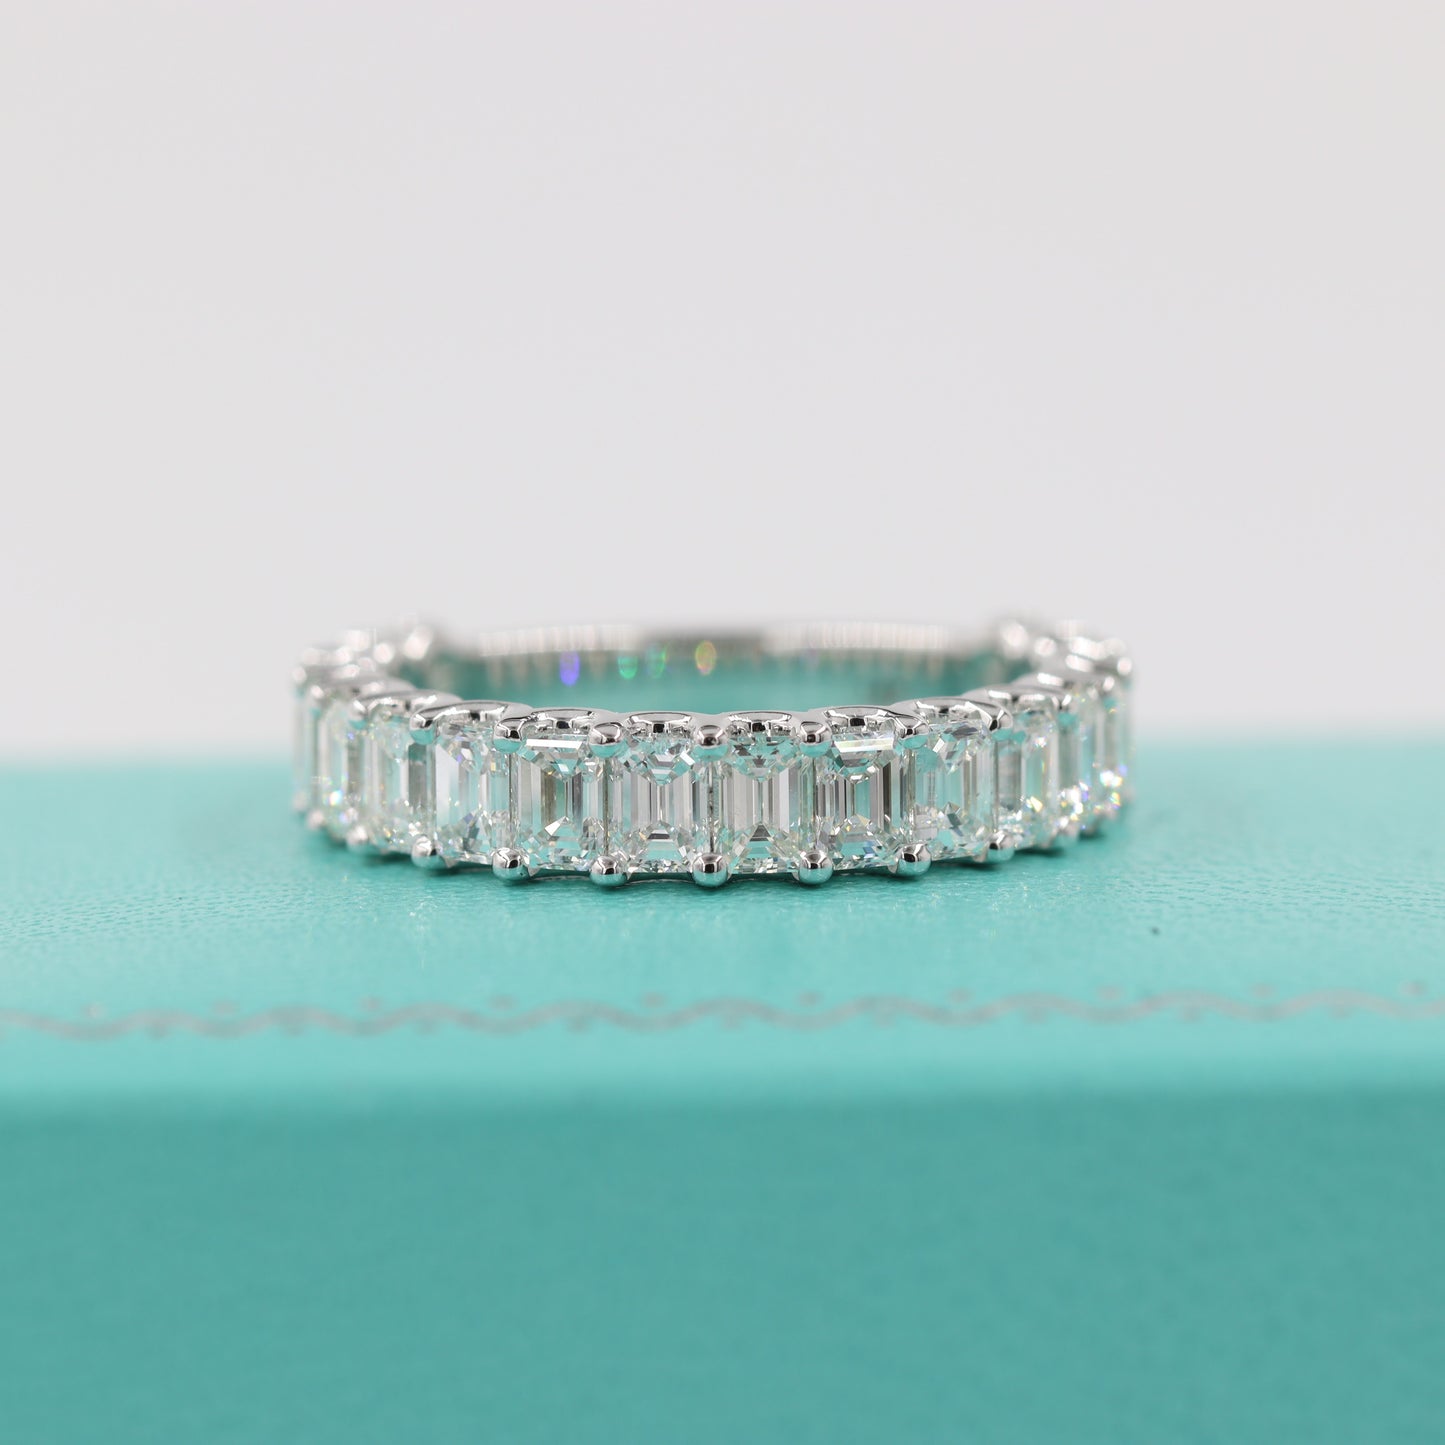 2.5ct Emerald Cut Diamond Wedding Band/ stackable Emerald Cut Diamond Ring/ Eternity Wedding Ring/ Anniversary gift Ring/ gifts for her